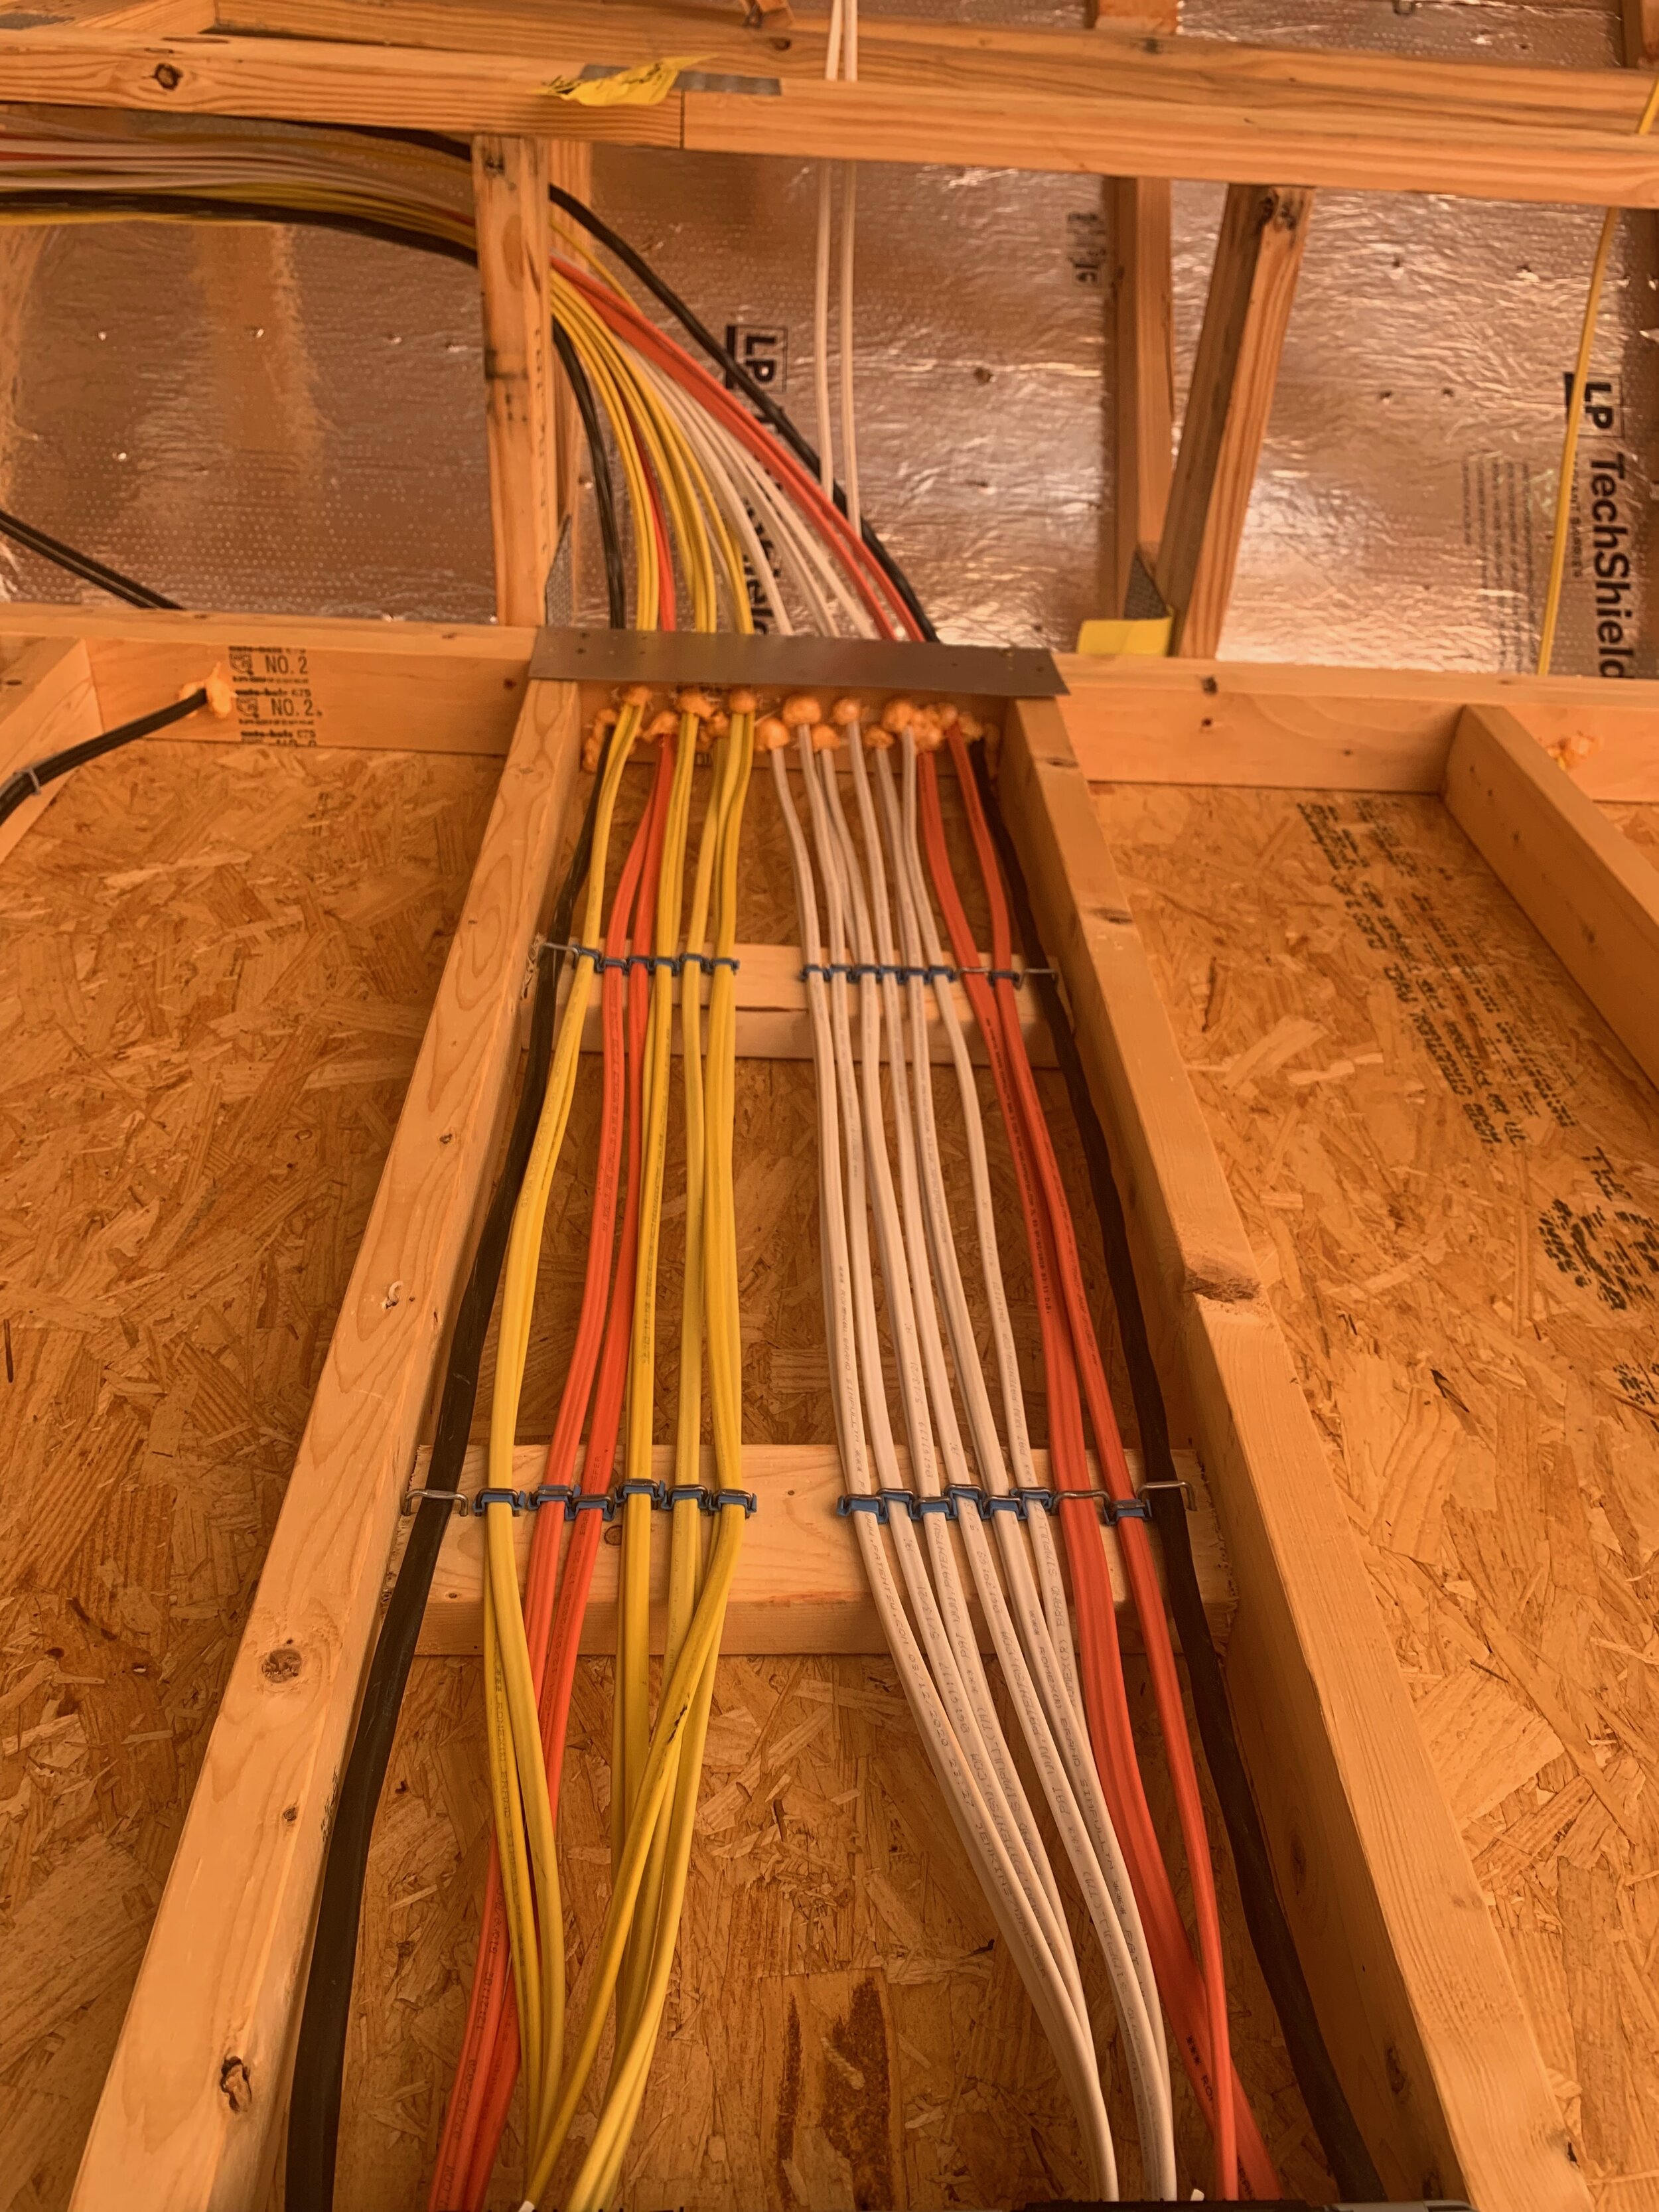 What Type Wire for Home Electrical